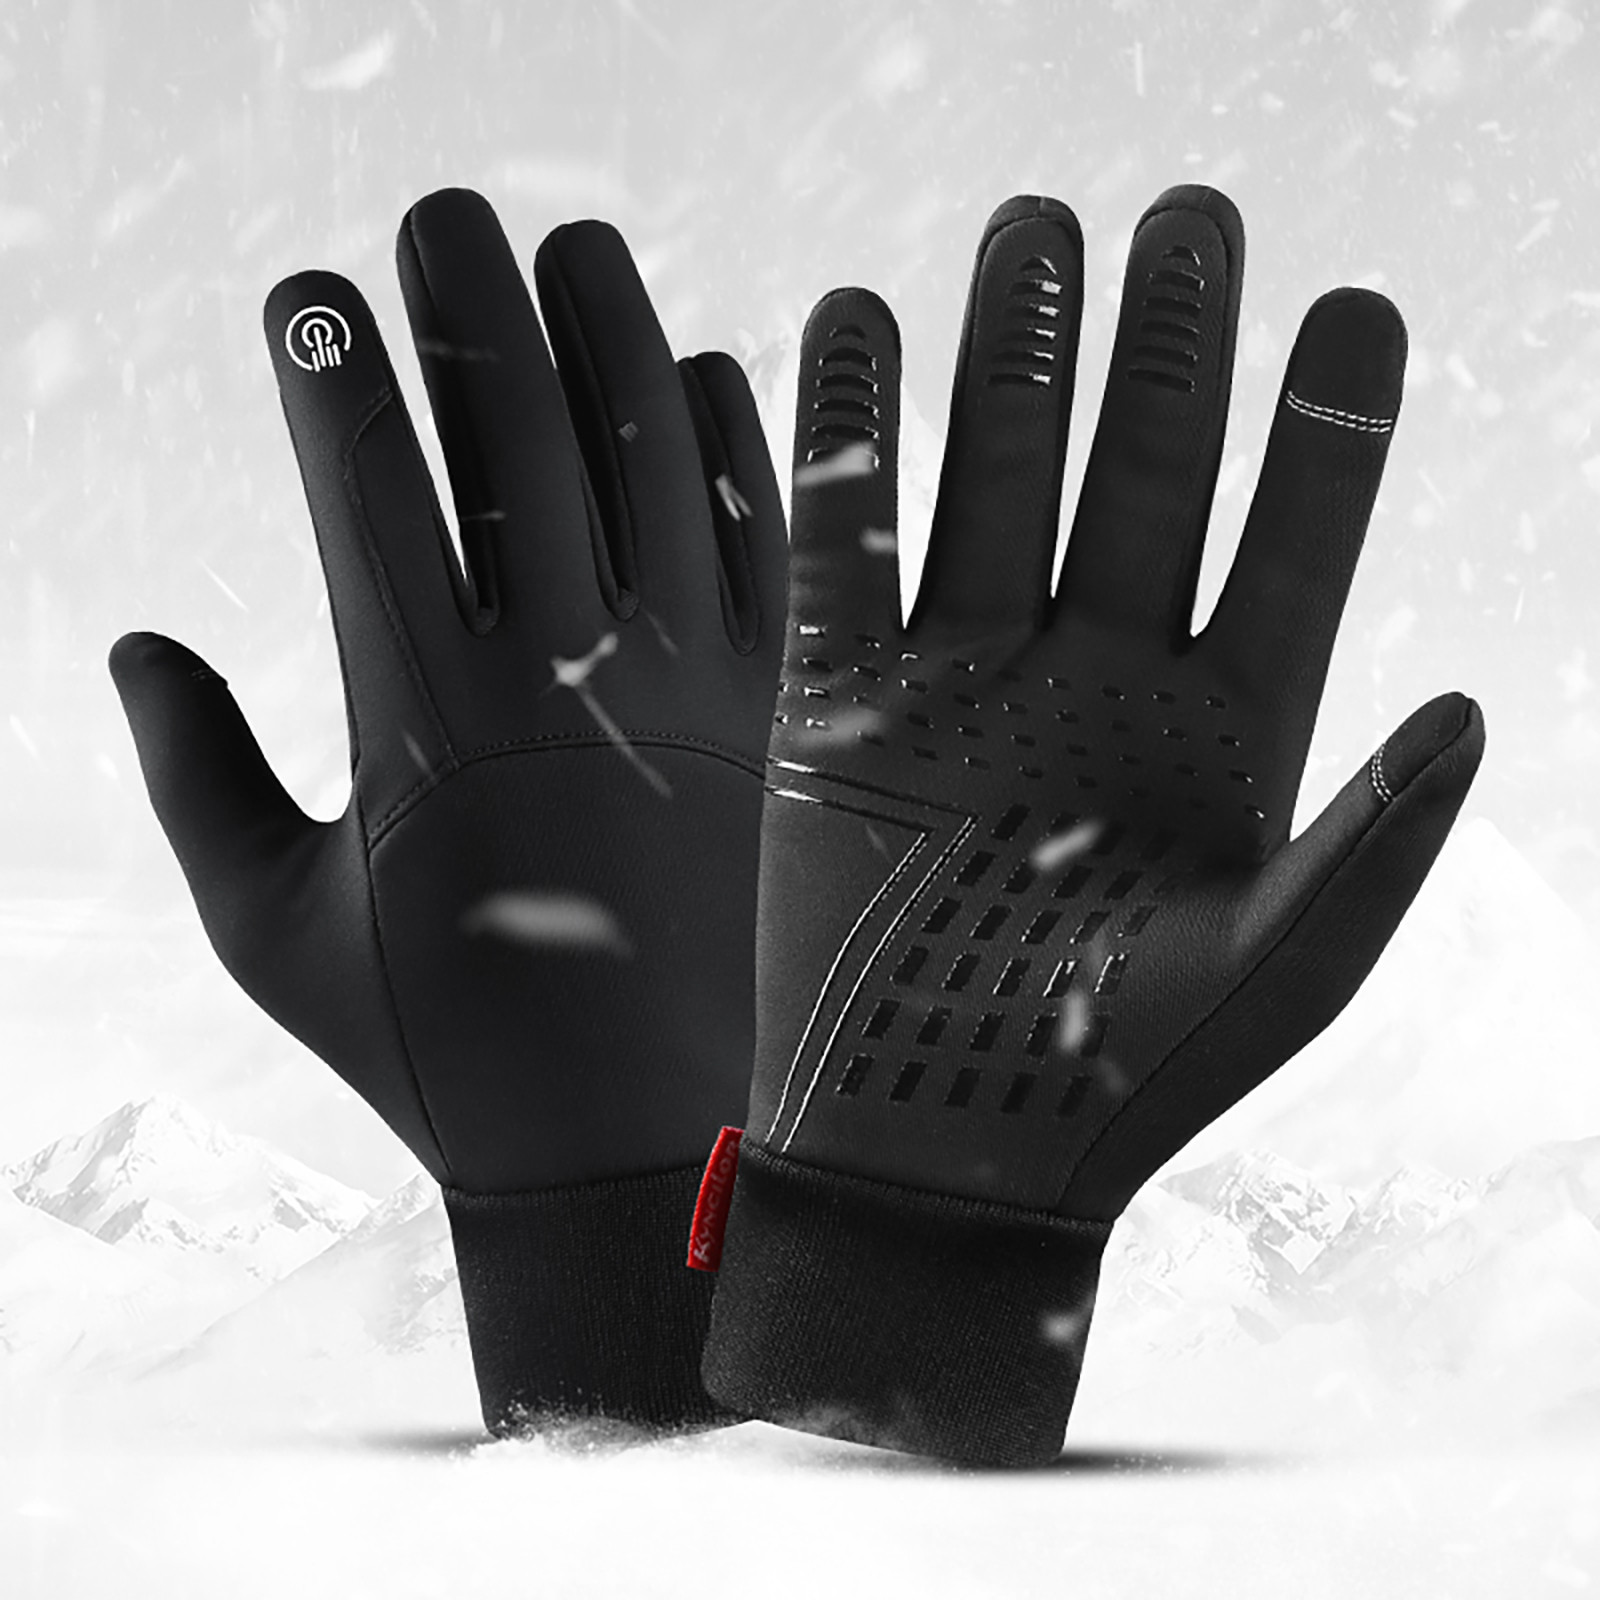 Winter Black Goves Mens Ladies Winter Accessories Running Gloves Thermo Waterproof Windproof Full-finger Sports Mittens #YJ